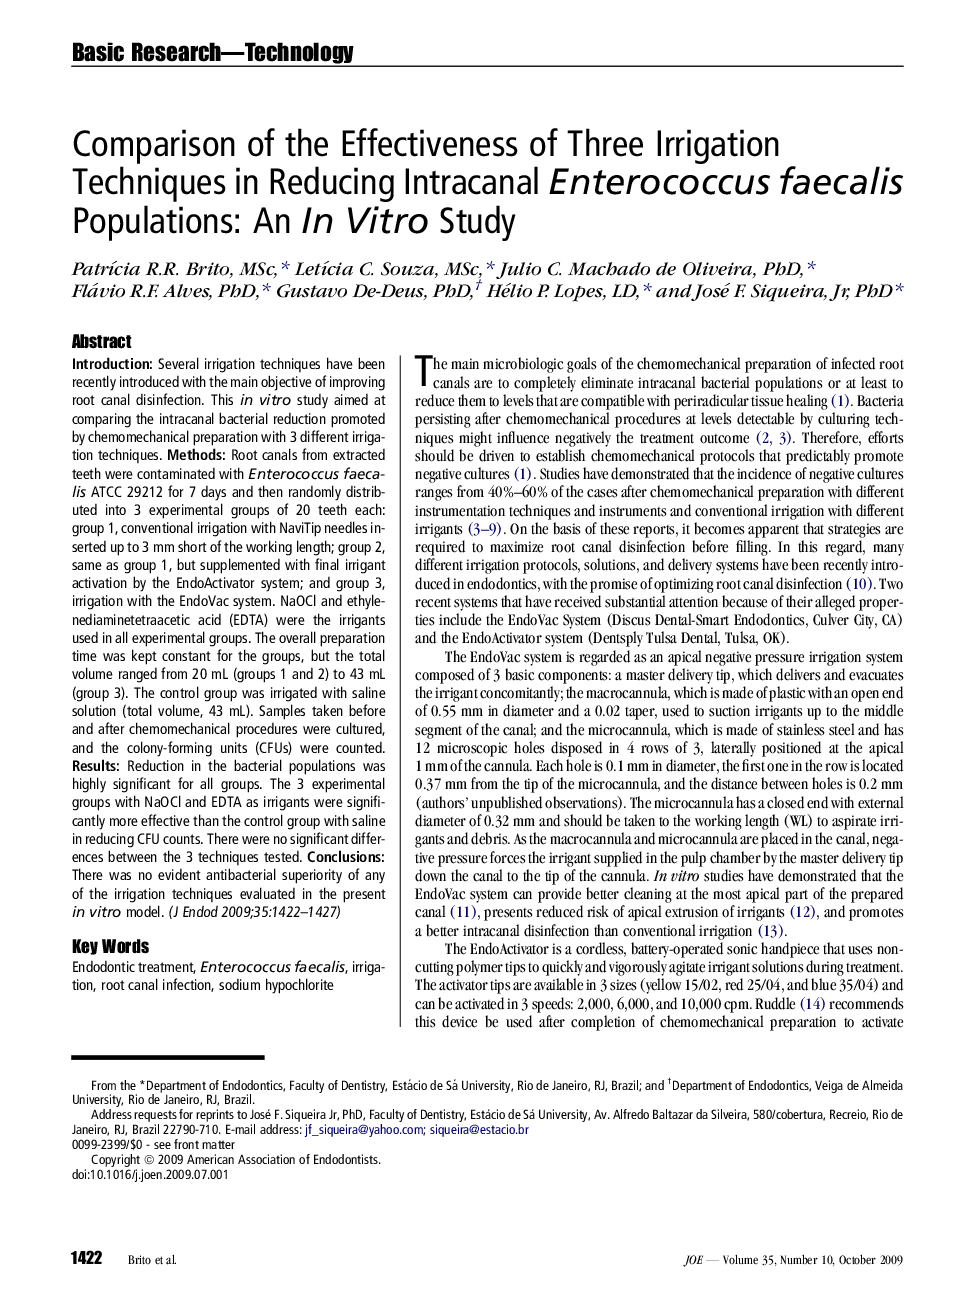 Comparison of the Effectiveness of Three Irrigation Techniques in Reducing Intracanal Enterococcus faecalis Populations: An In Vitro Study